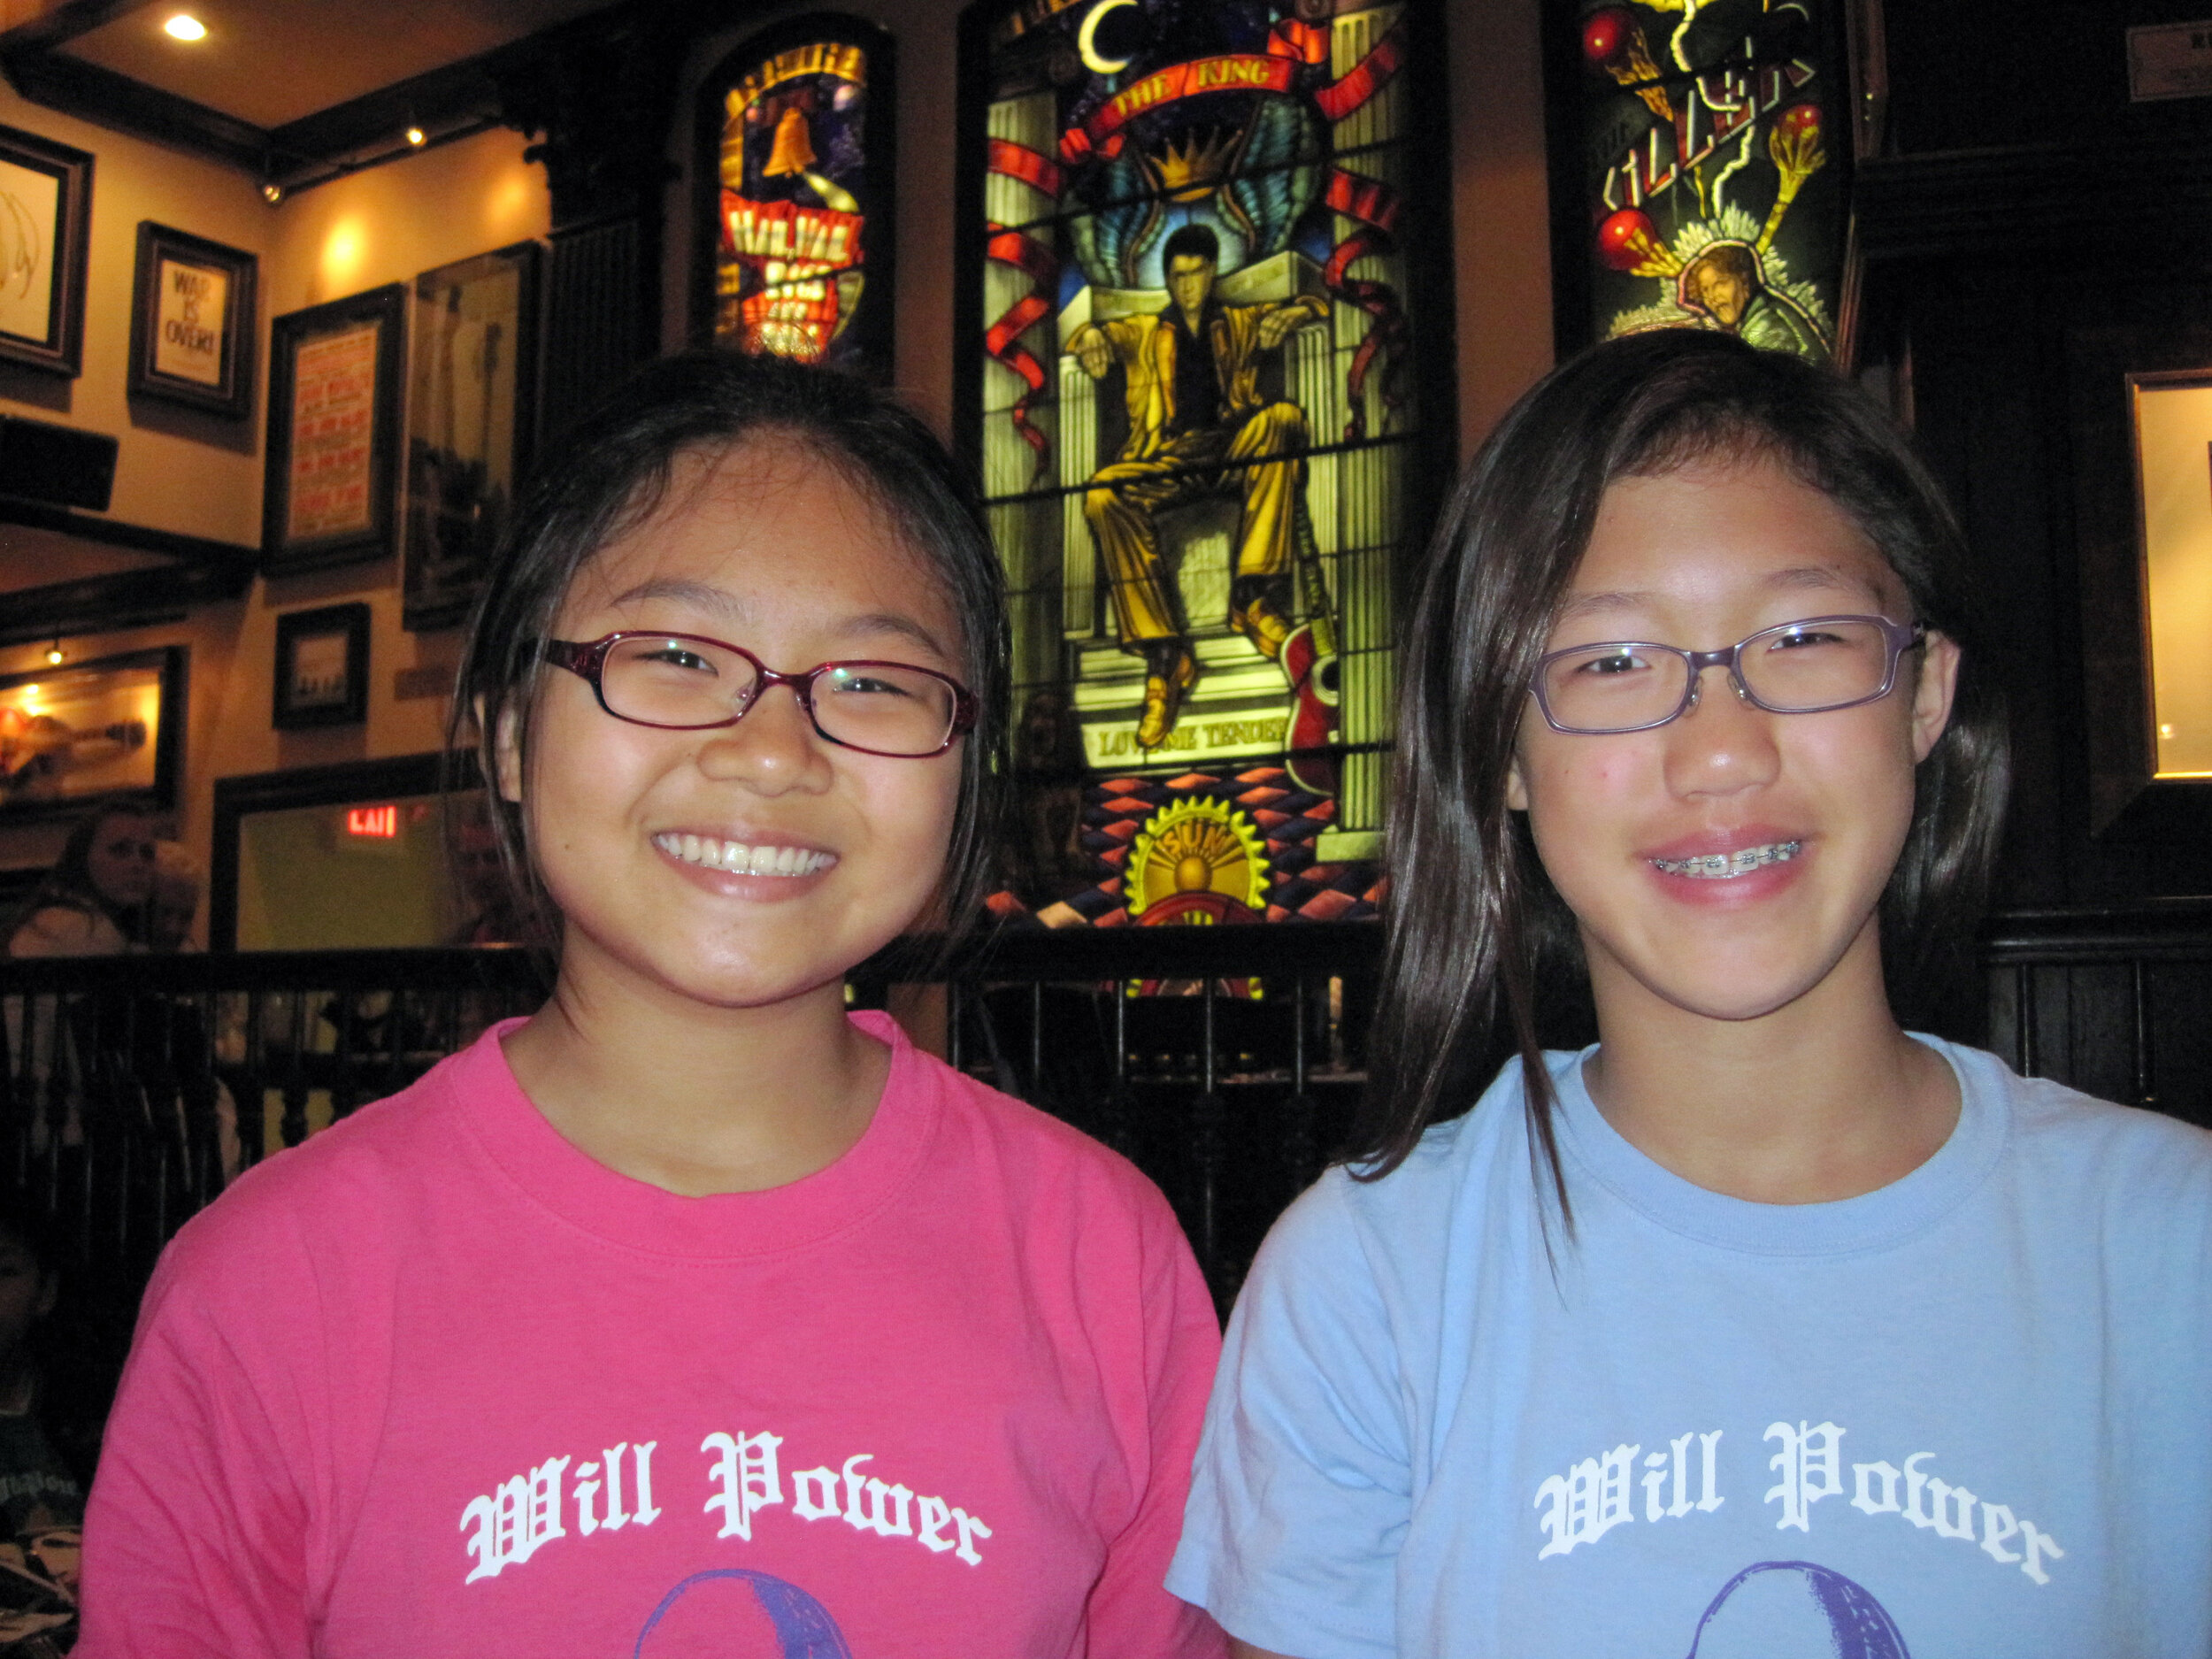  Hyewon and Soo Min at The Hard Rock Cafe, Philadelphia 